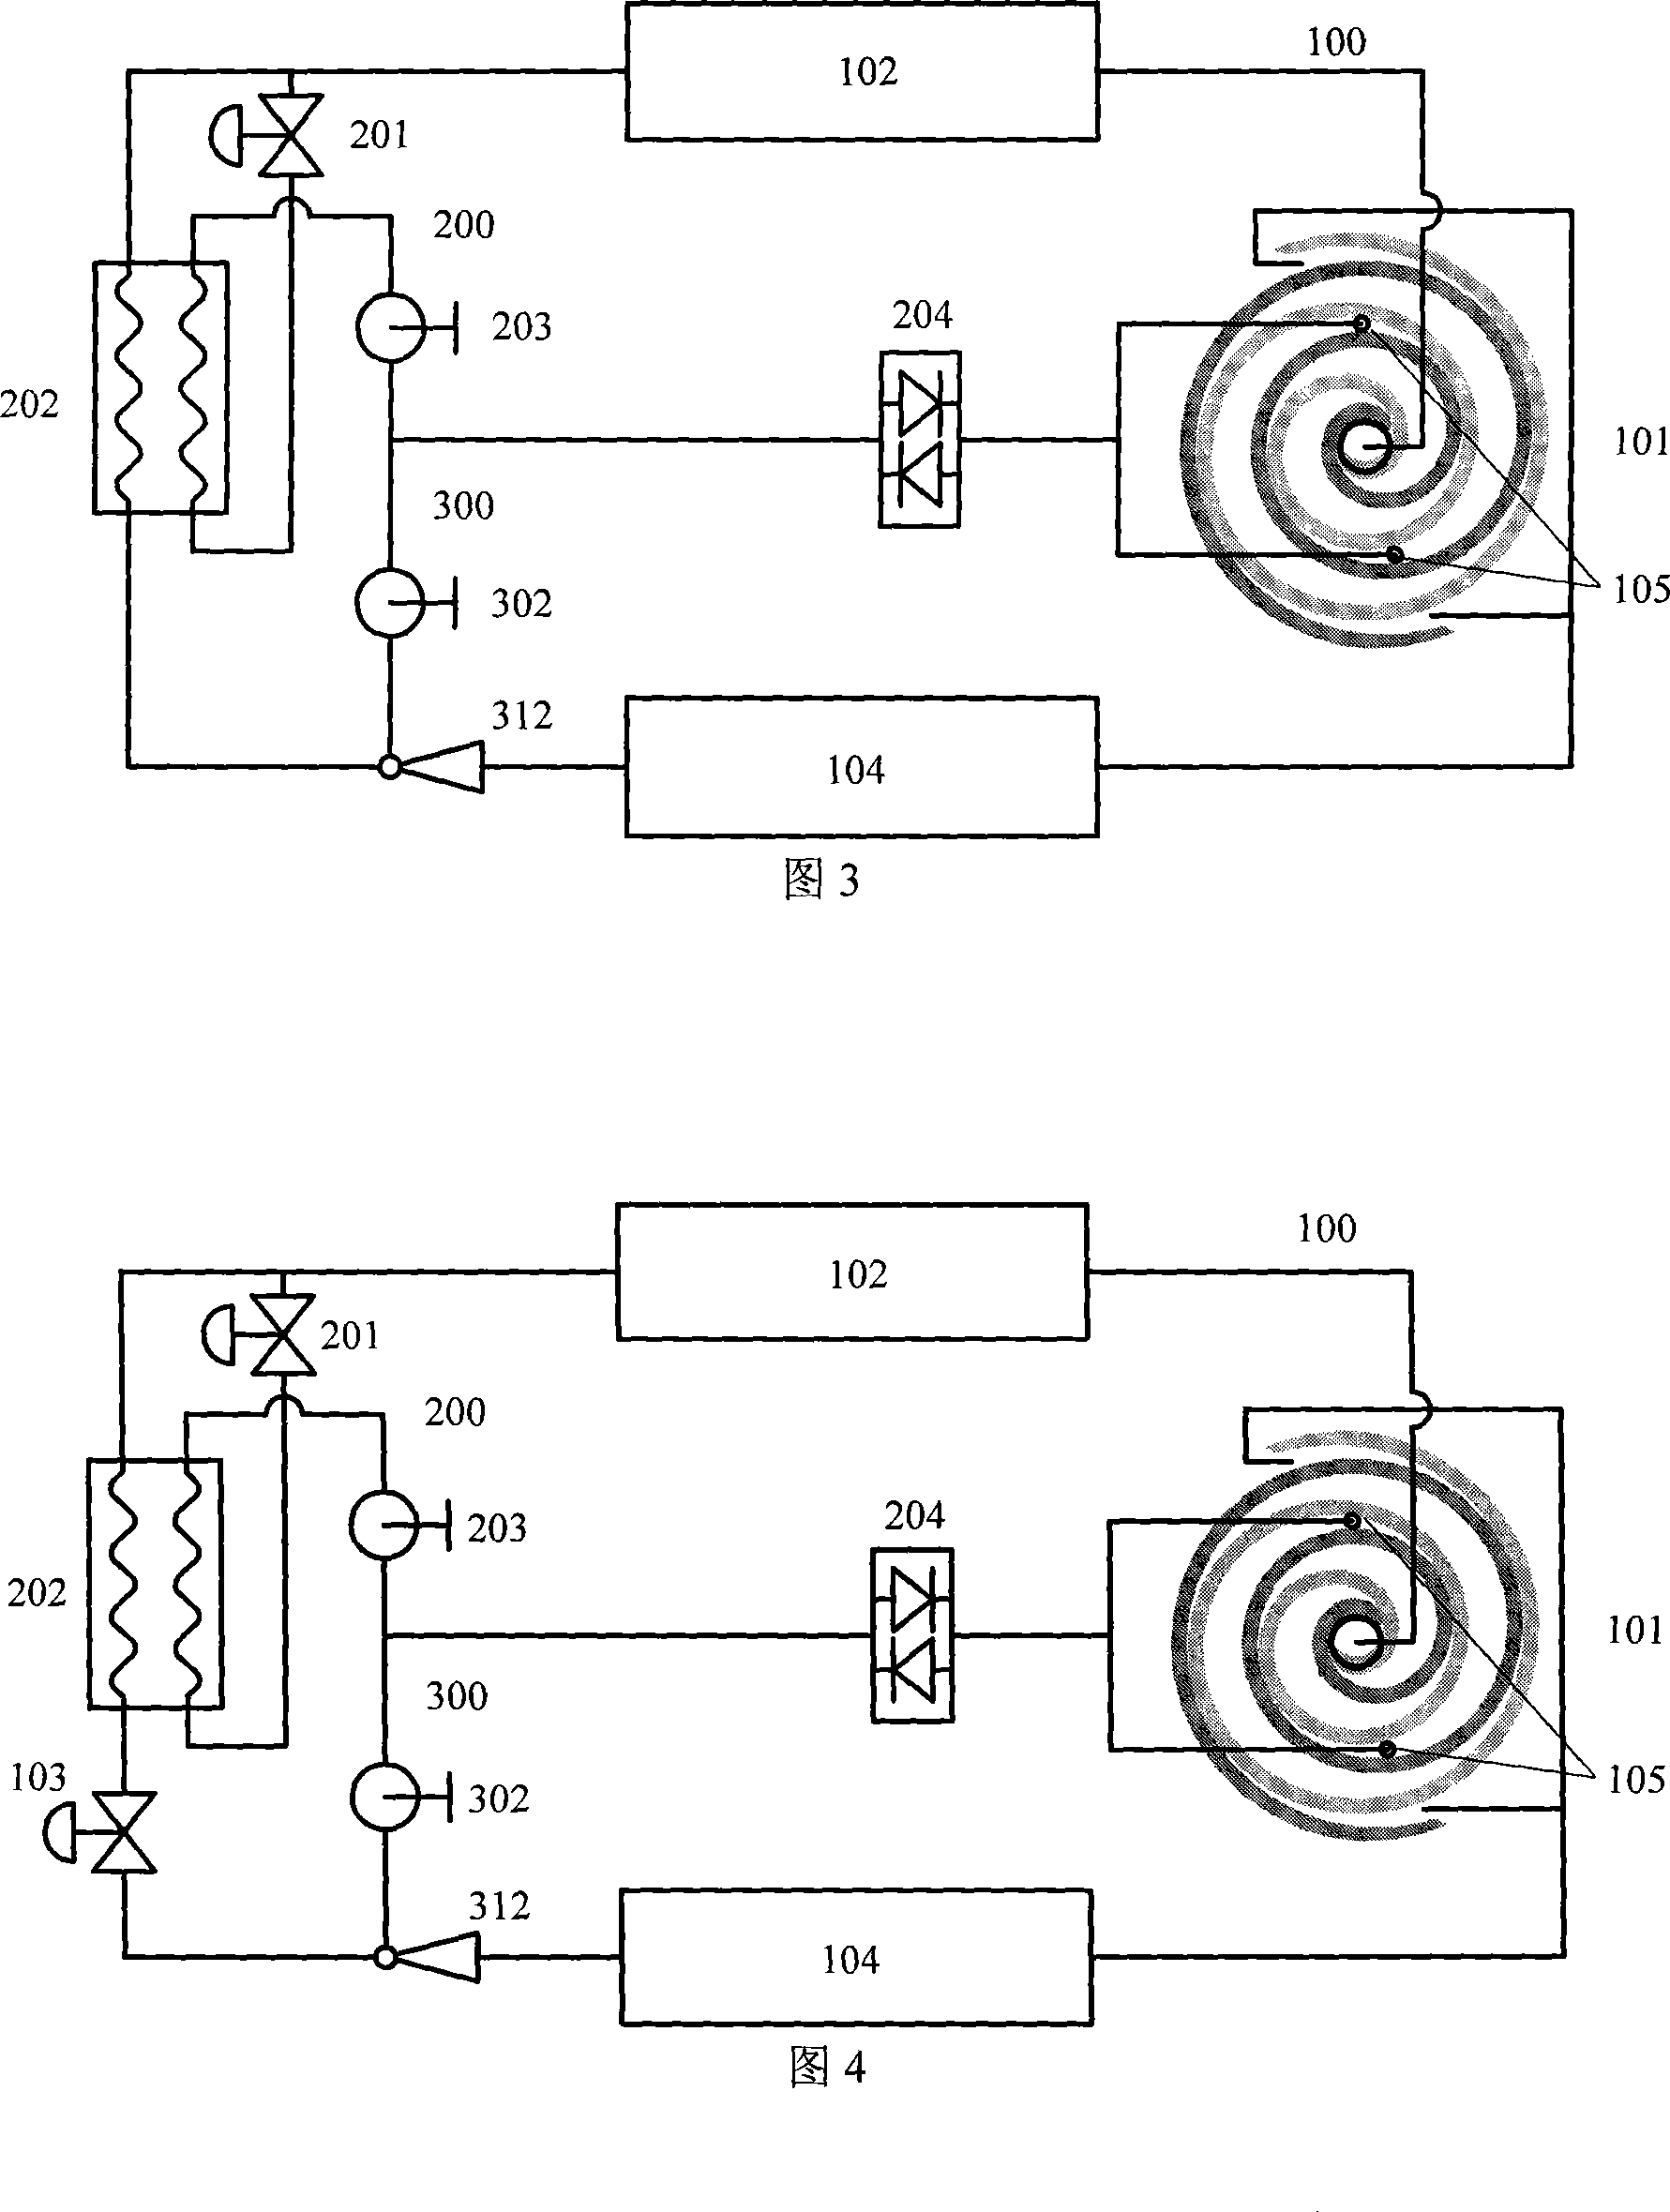 Capacity adjustable vortex compressor refrigeration system with main return loop installed with ejector